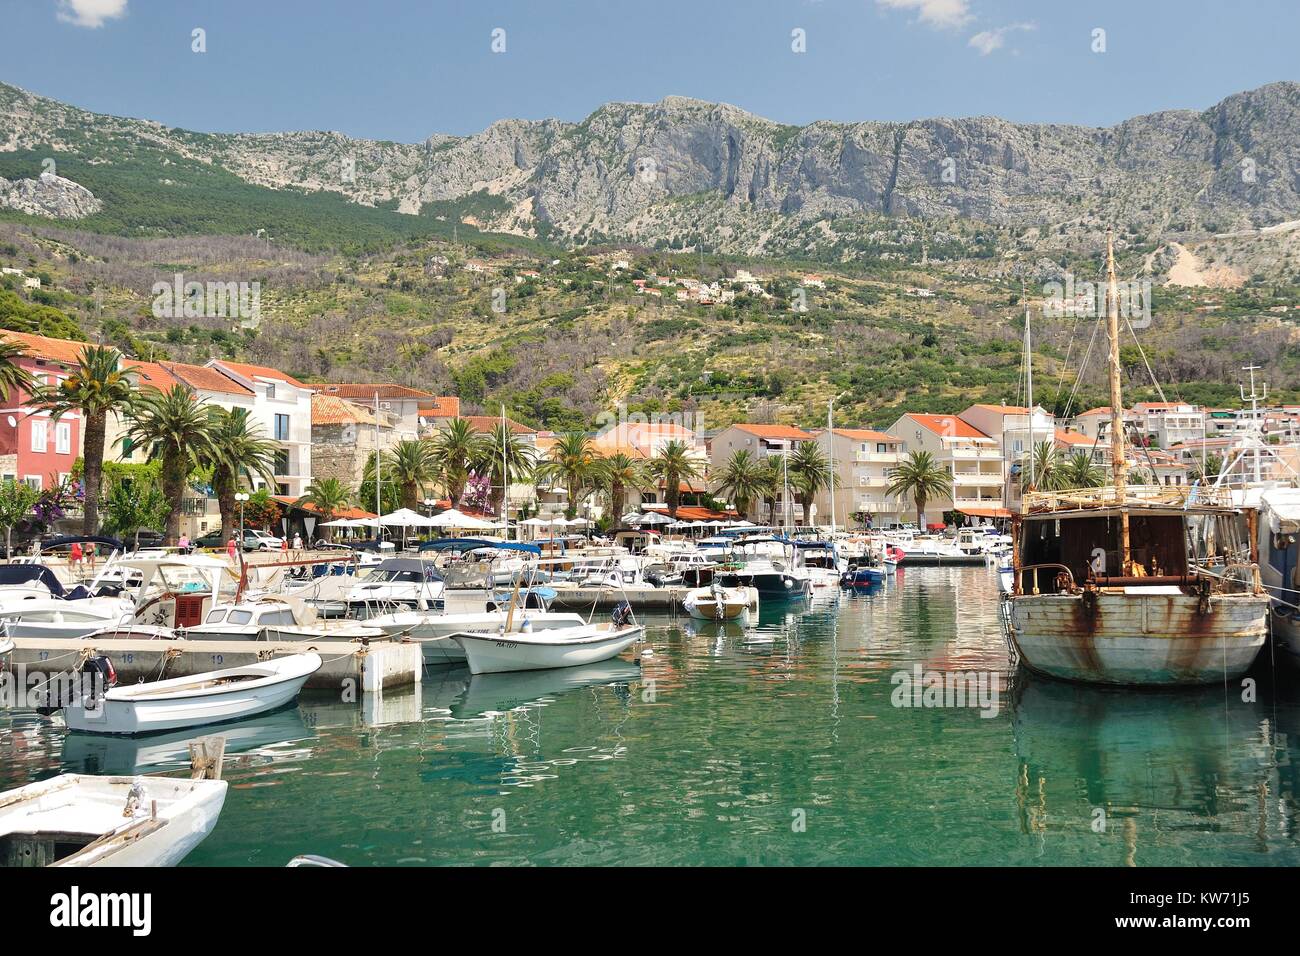 Port of Podgora in Croatia with apartments, boats and with mountain Biokovo in background. Podgora is a popular holiday resort. Stock Photo